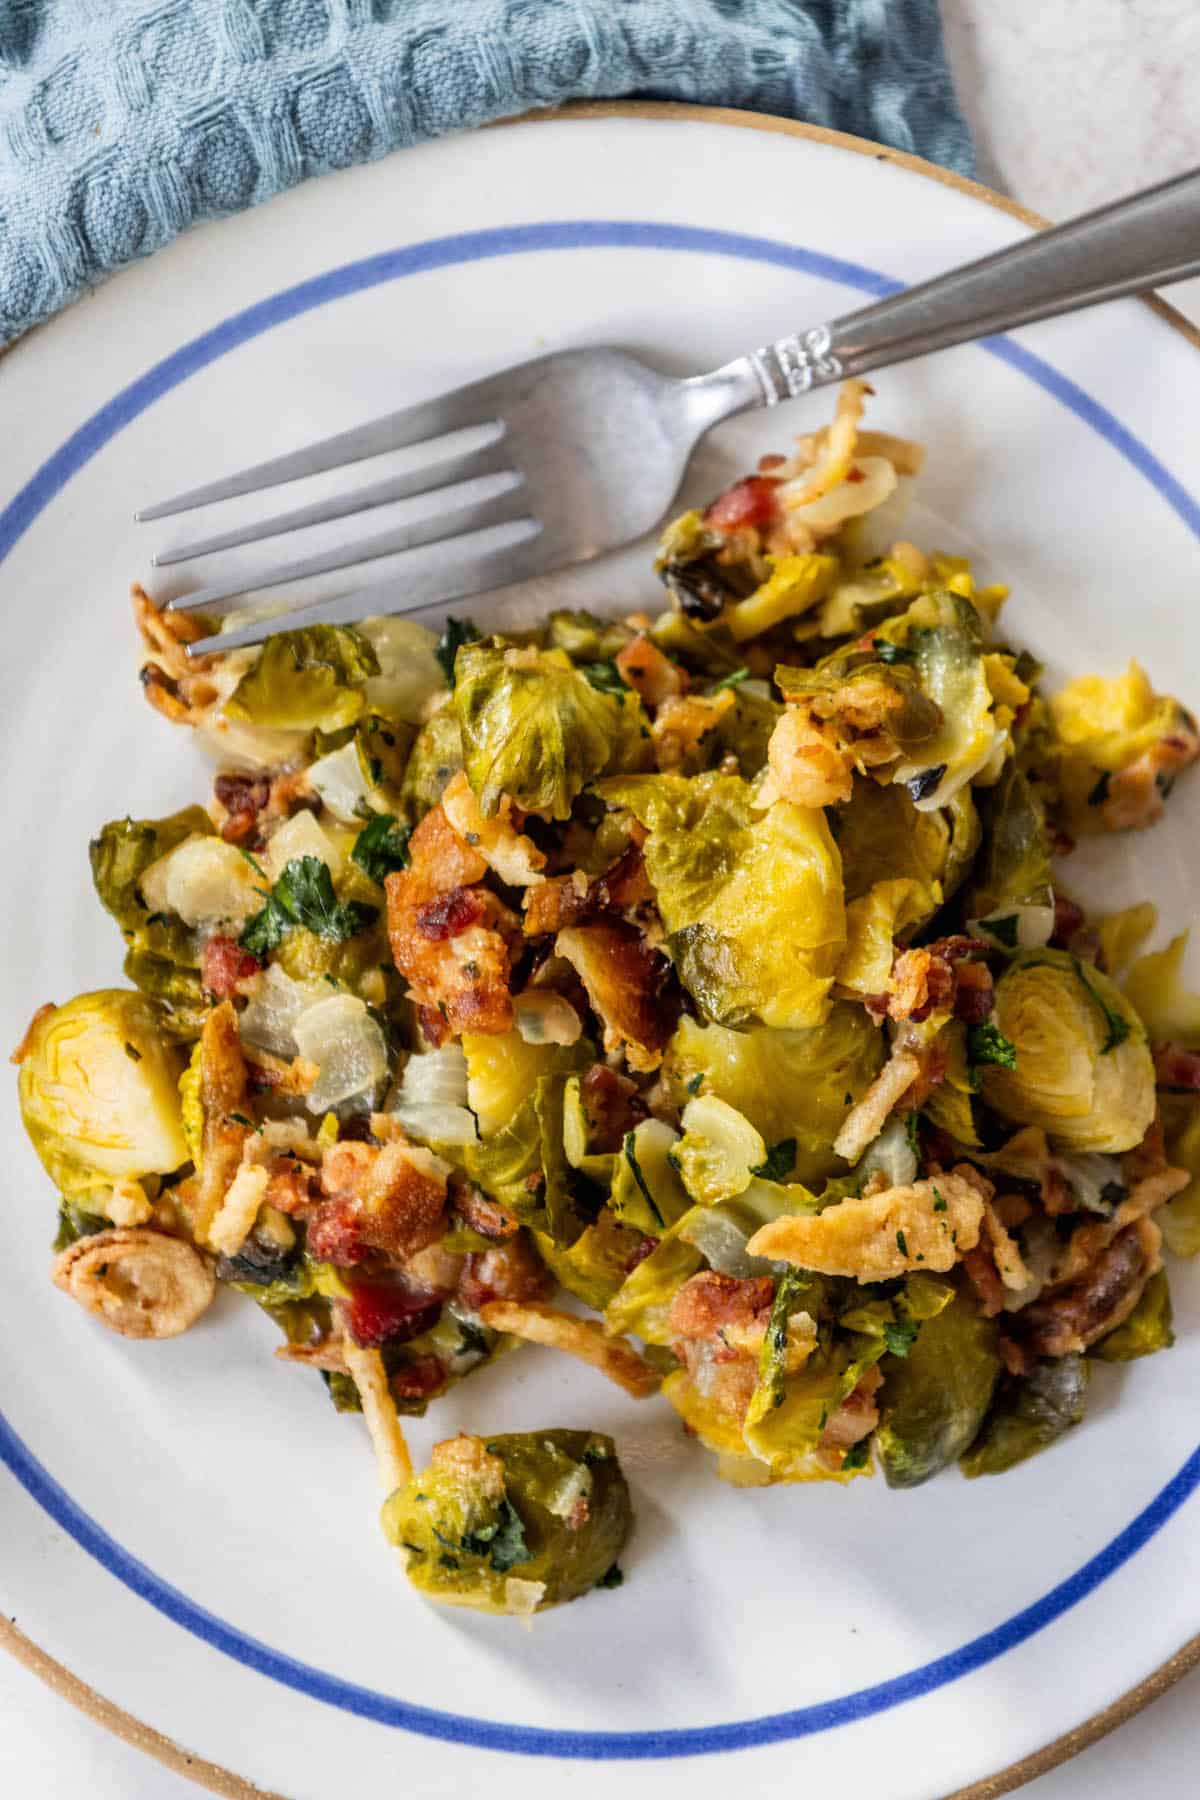 Creamy Brussels sprouts and bacon on a plate with a fork.